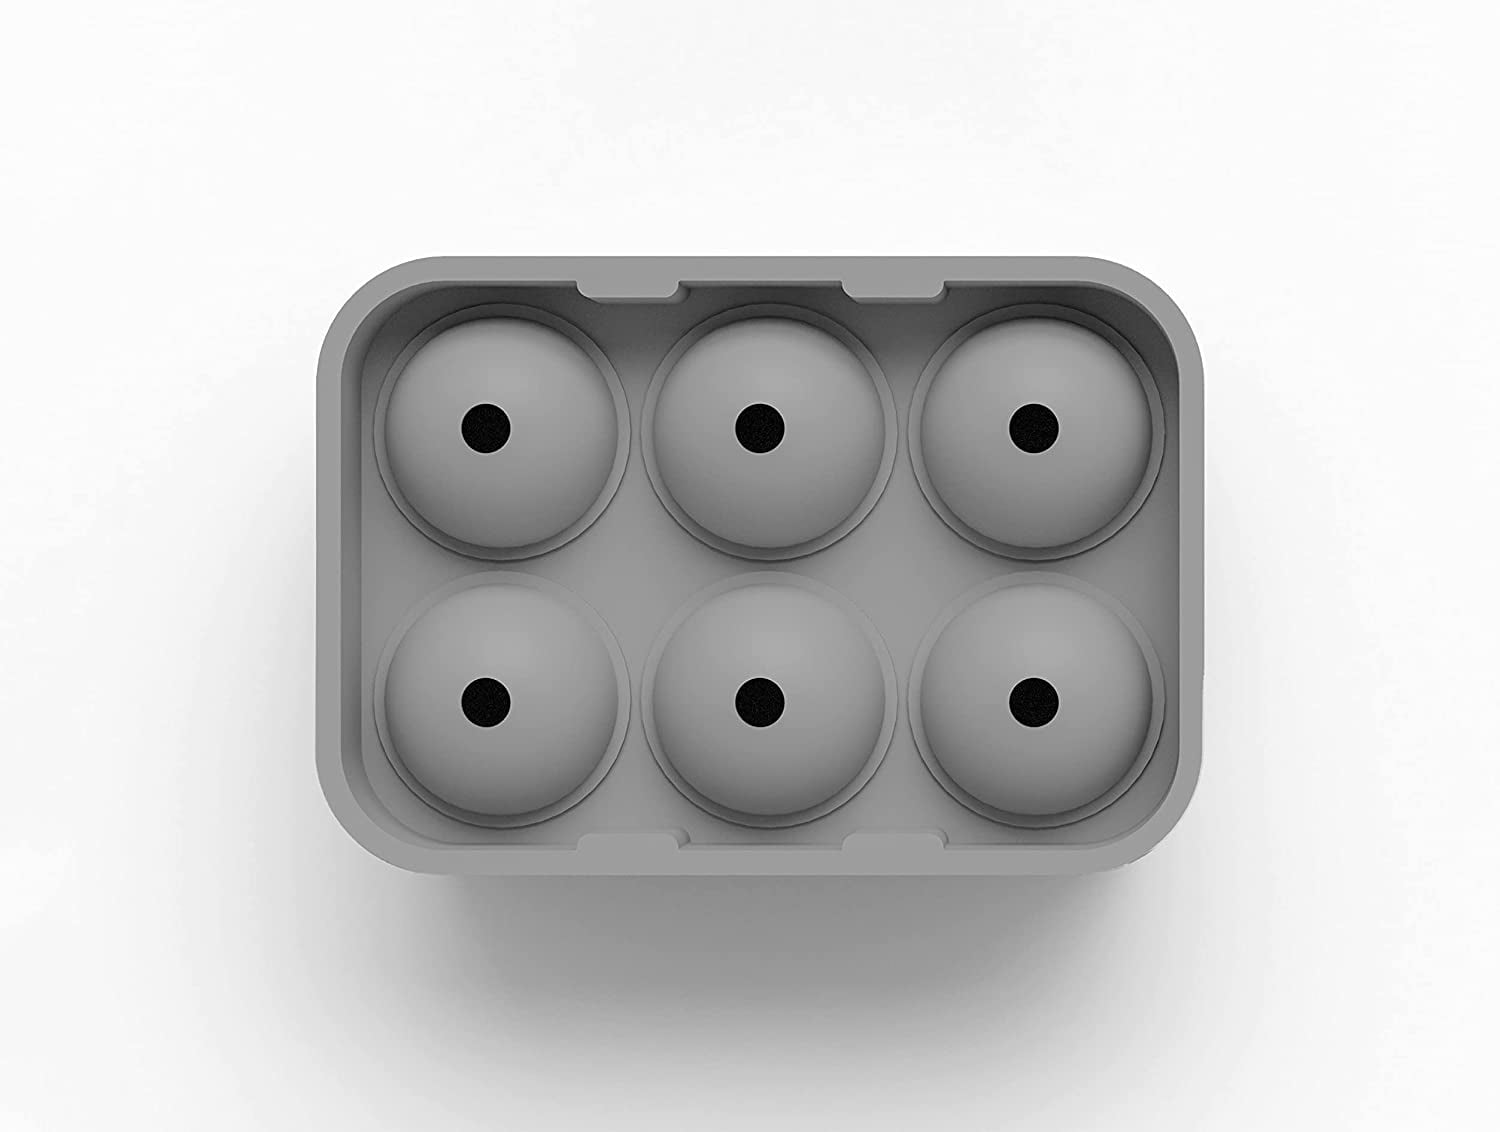 Glacio Ice Cube Trays Silicone Combo Set Mold of 1 Sphere Ice and Square